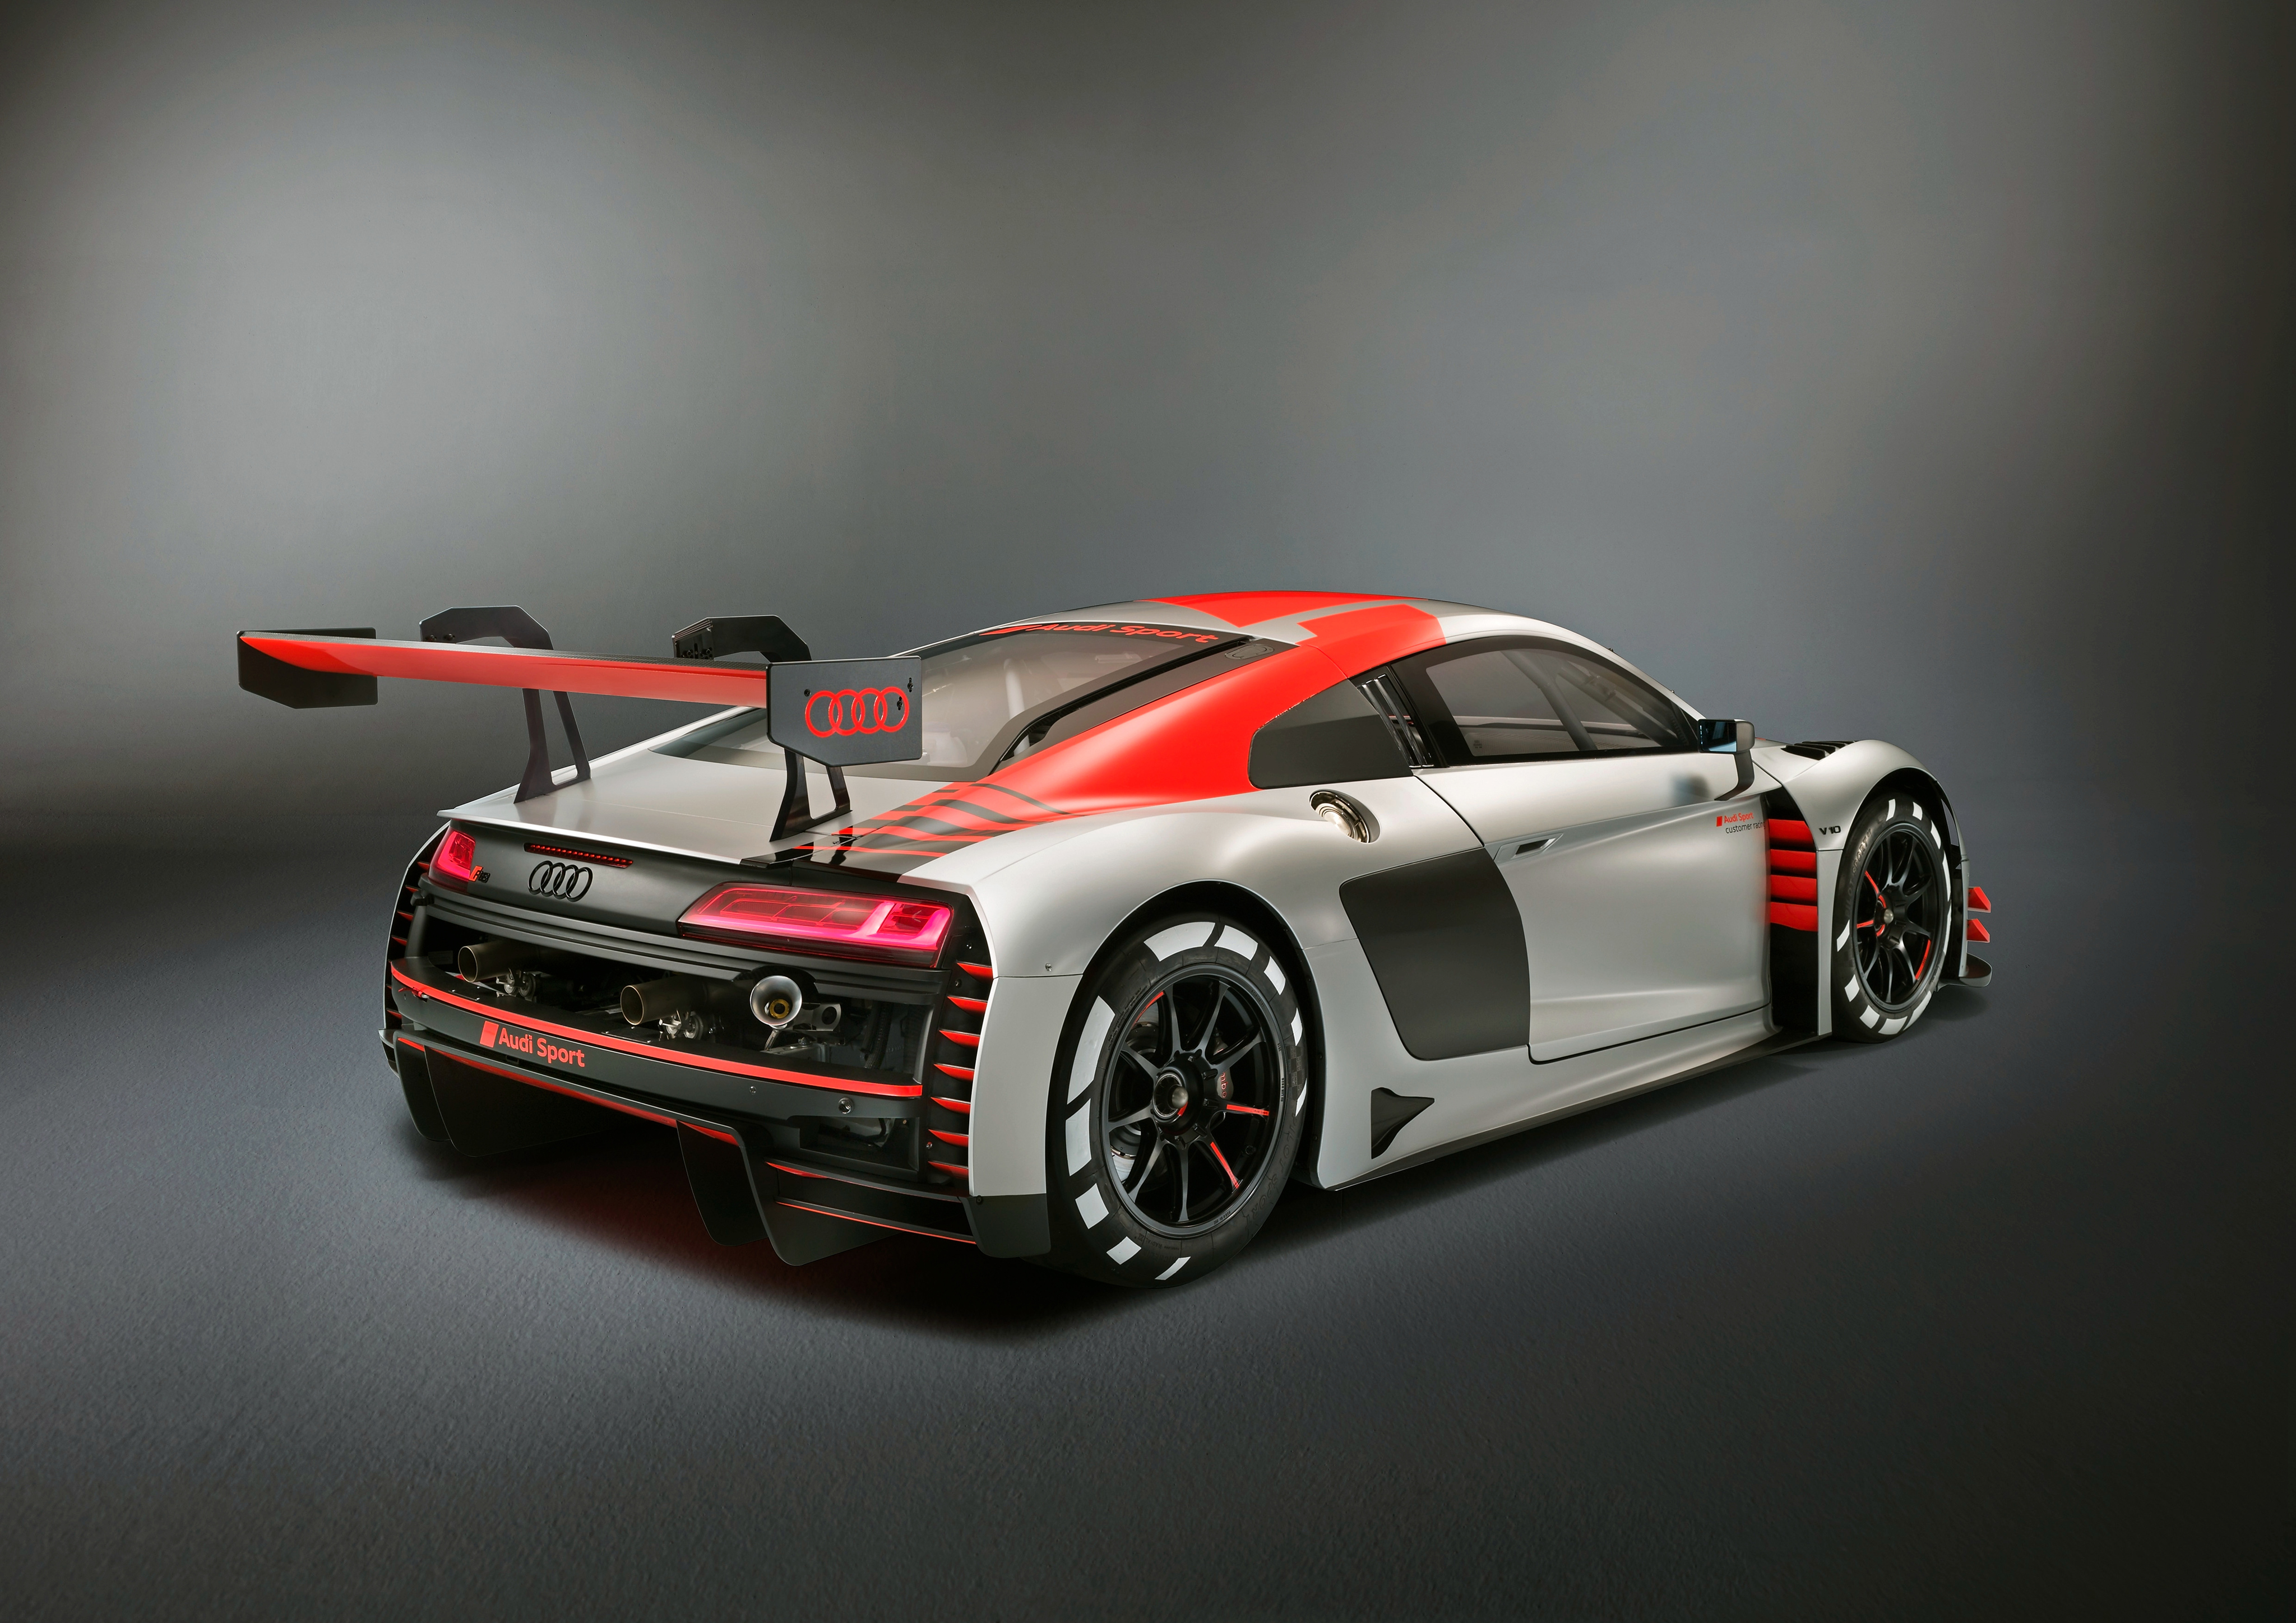 Free photo Sporty Audi R8 Lms, Audi R8 photographed from behind